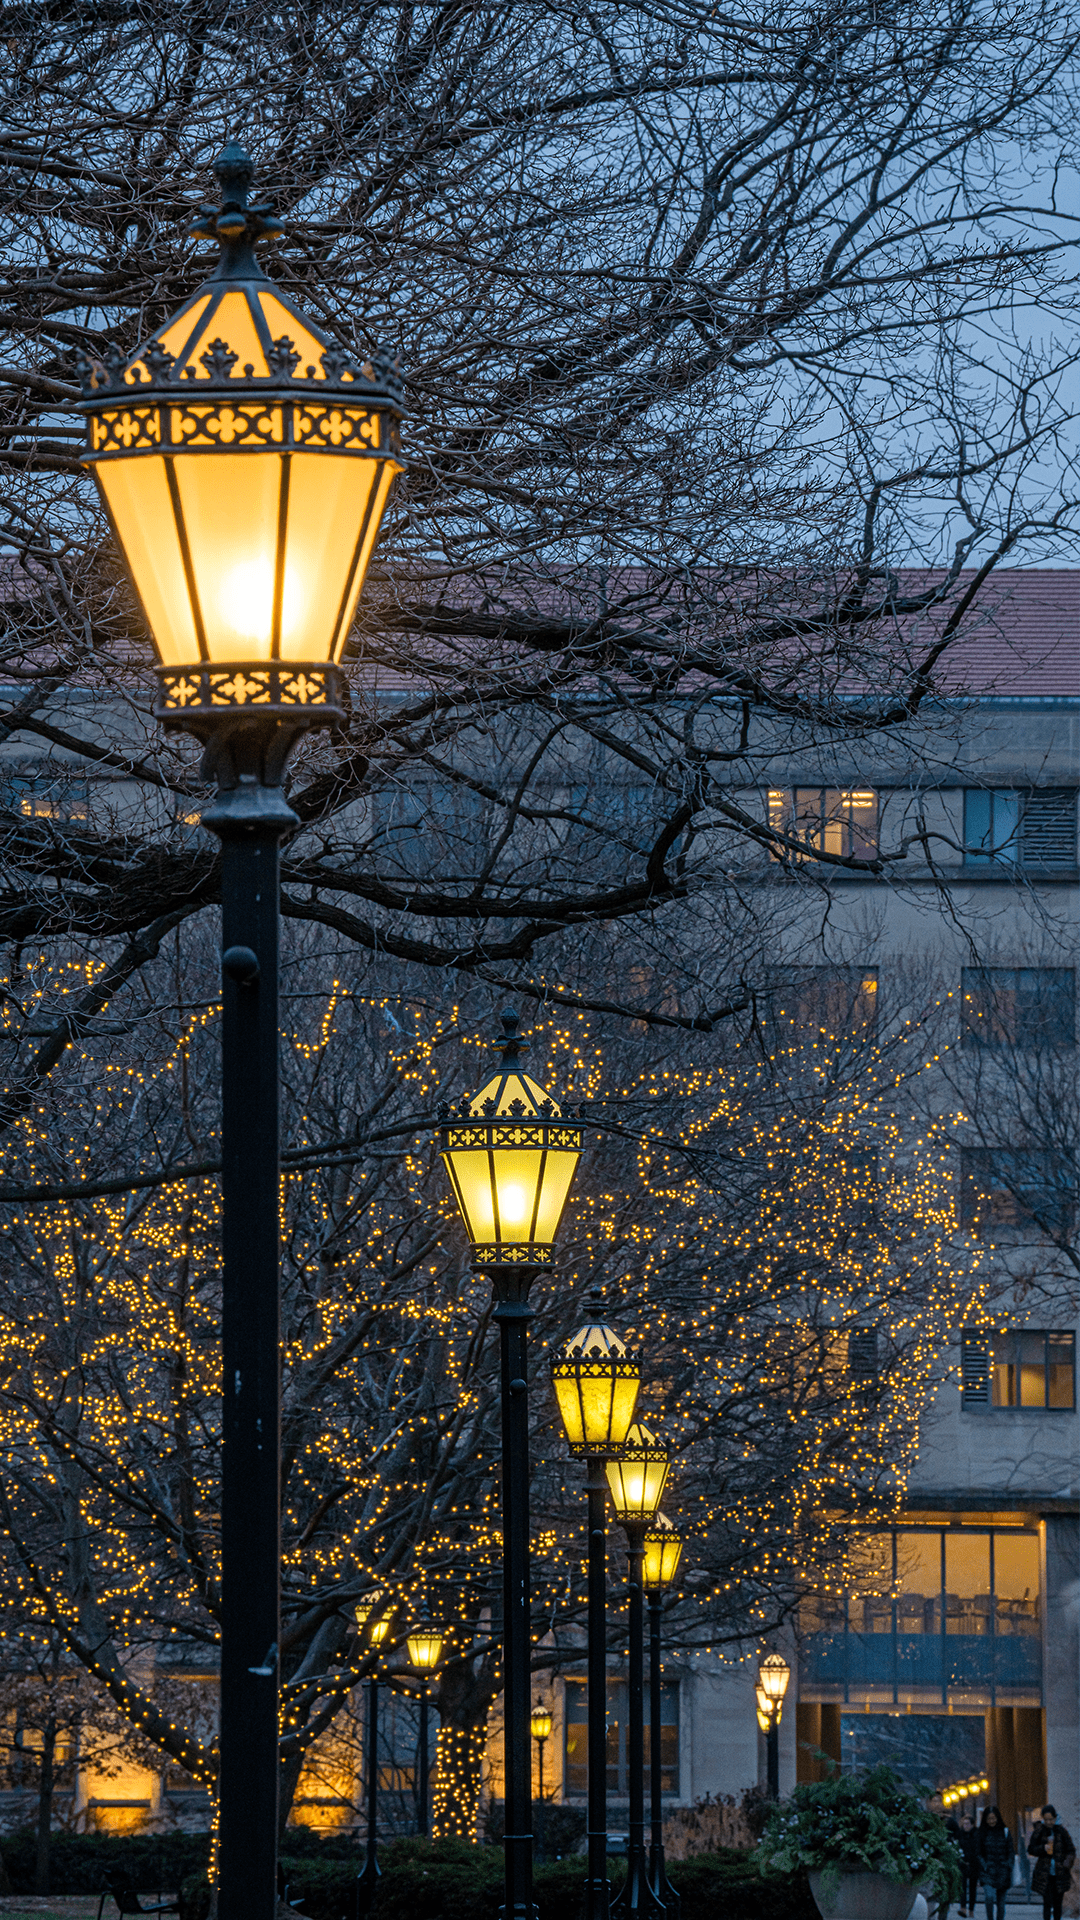 Yellow lamps in Quad at dusk with white holiday lights in the background.